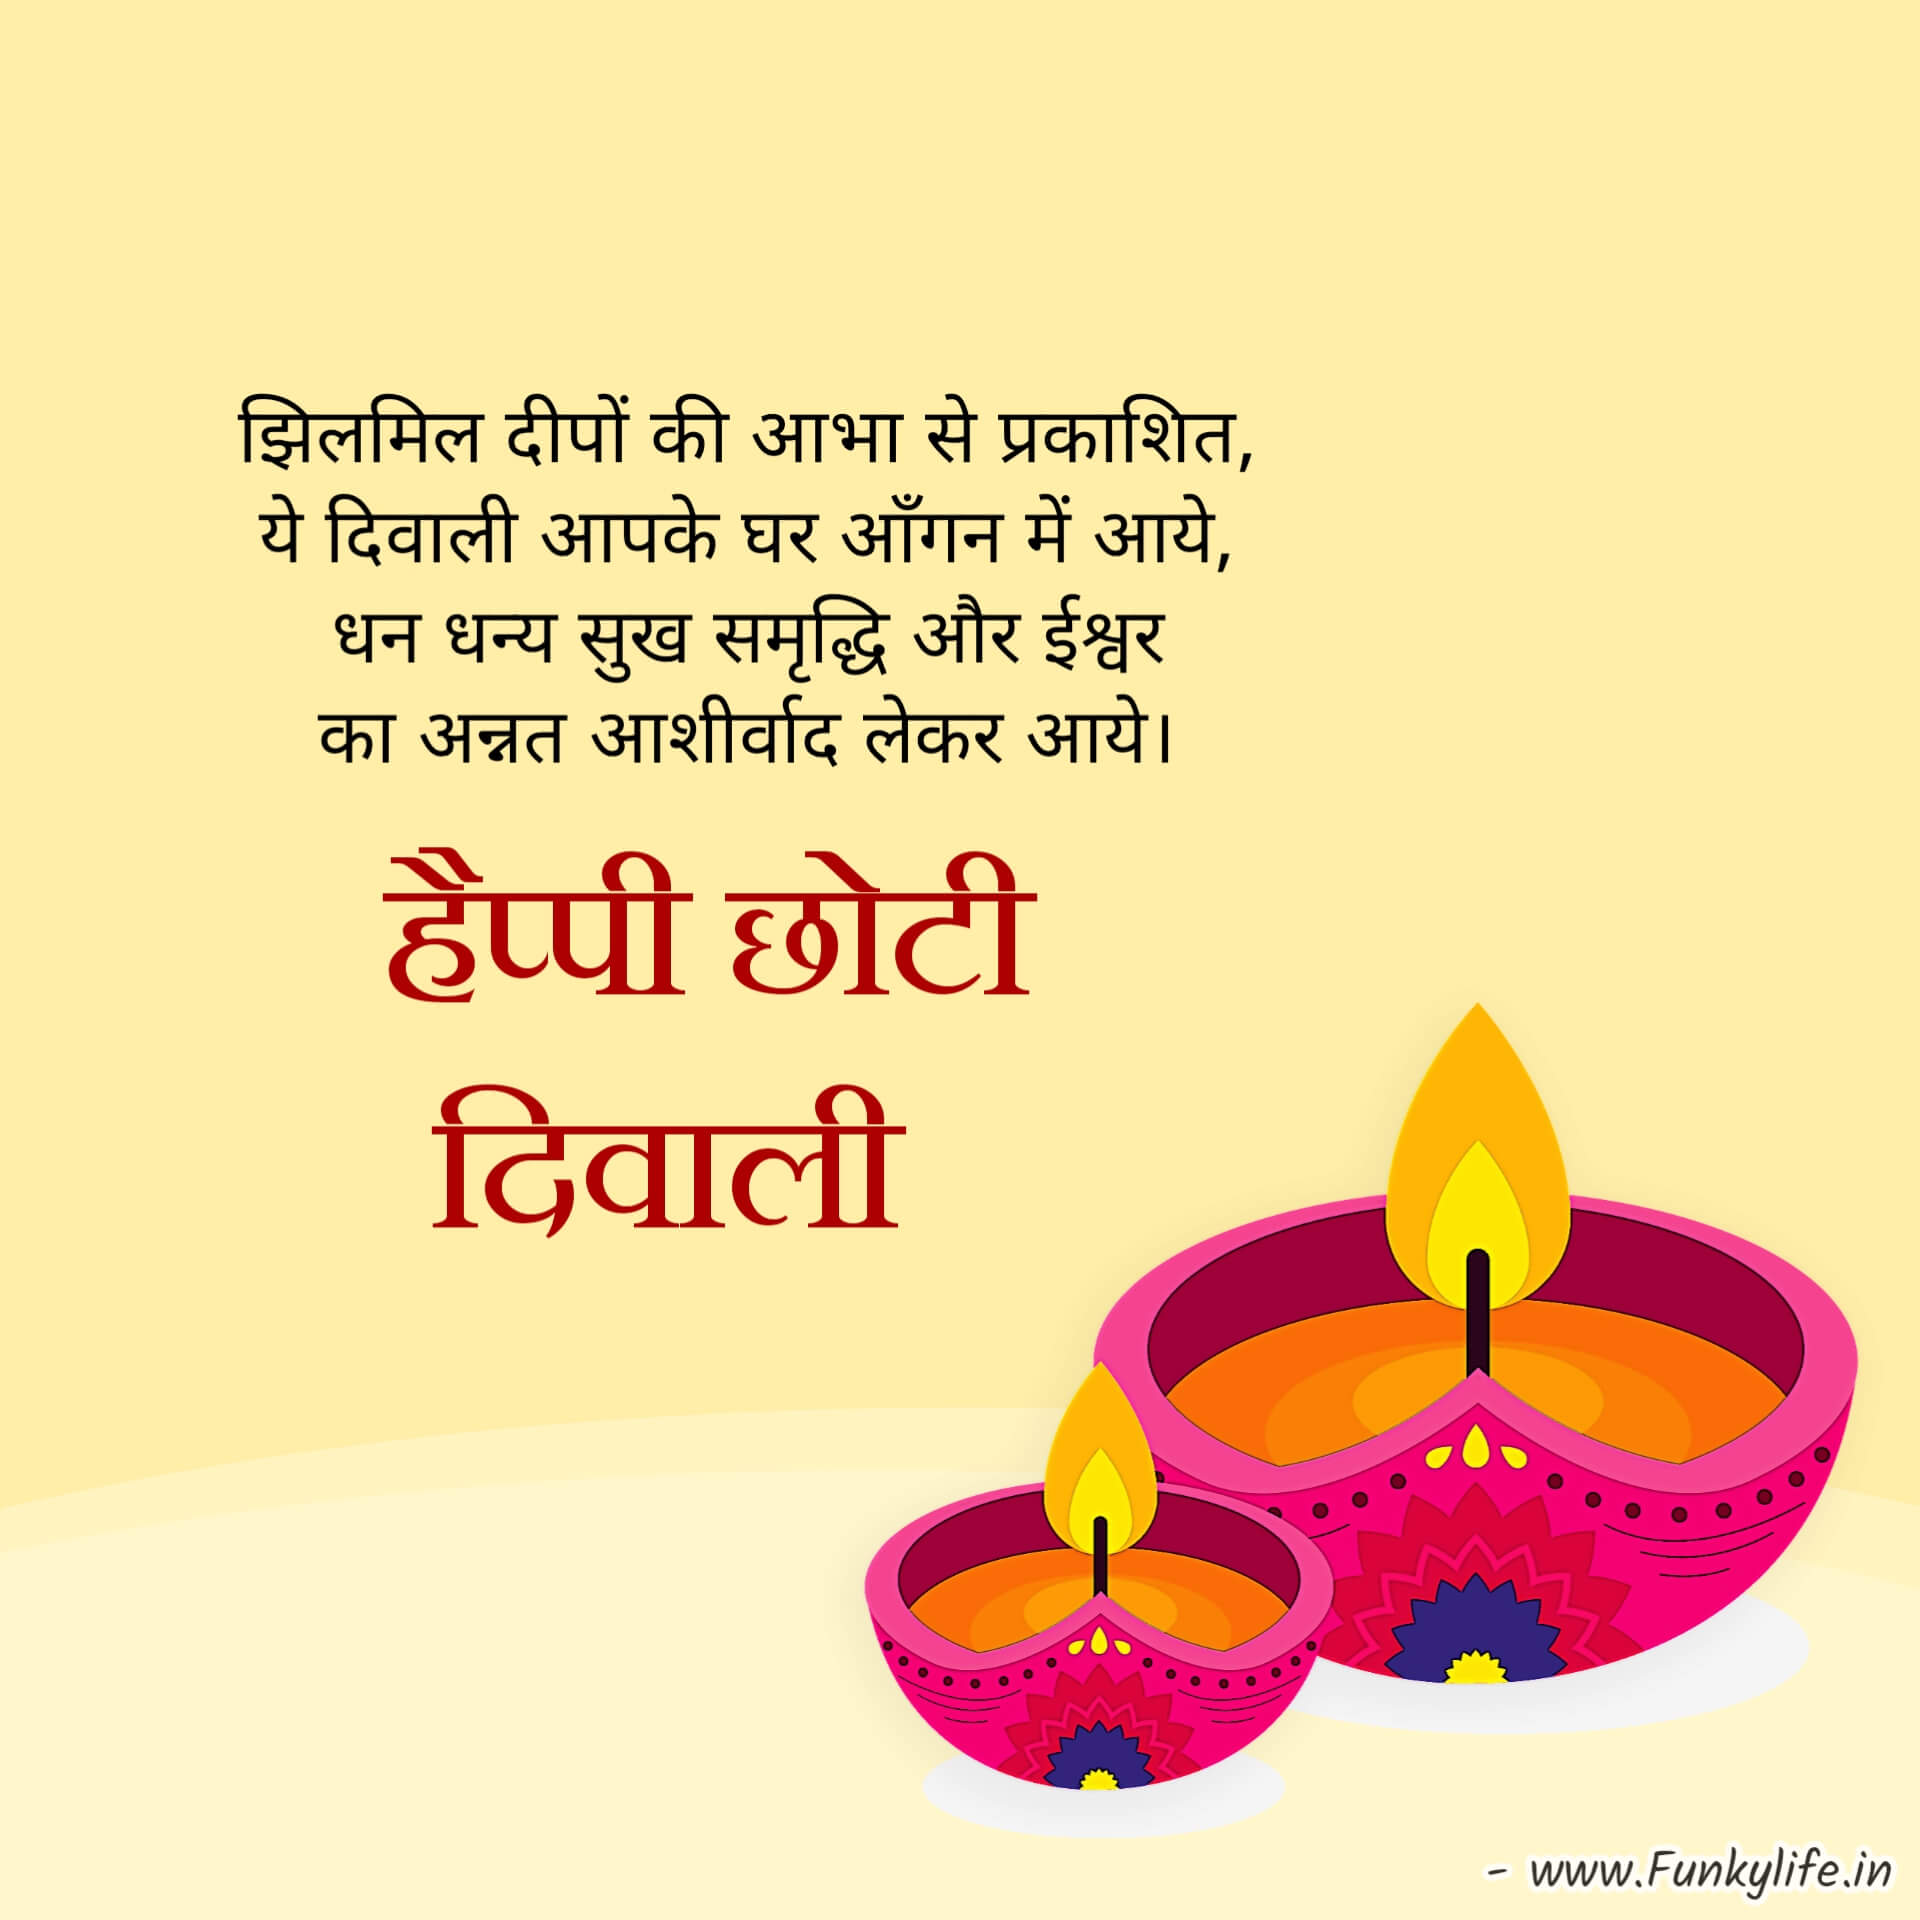 Hindi Diwali Wishes for Facebook